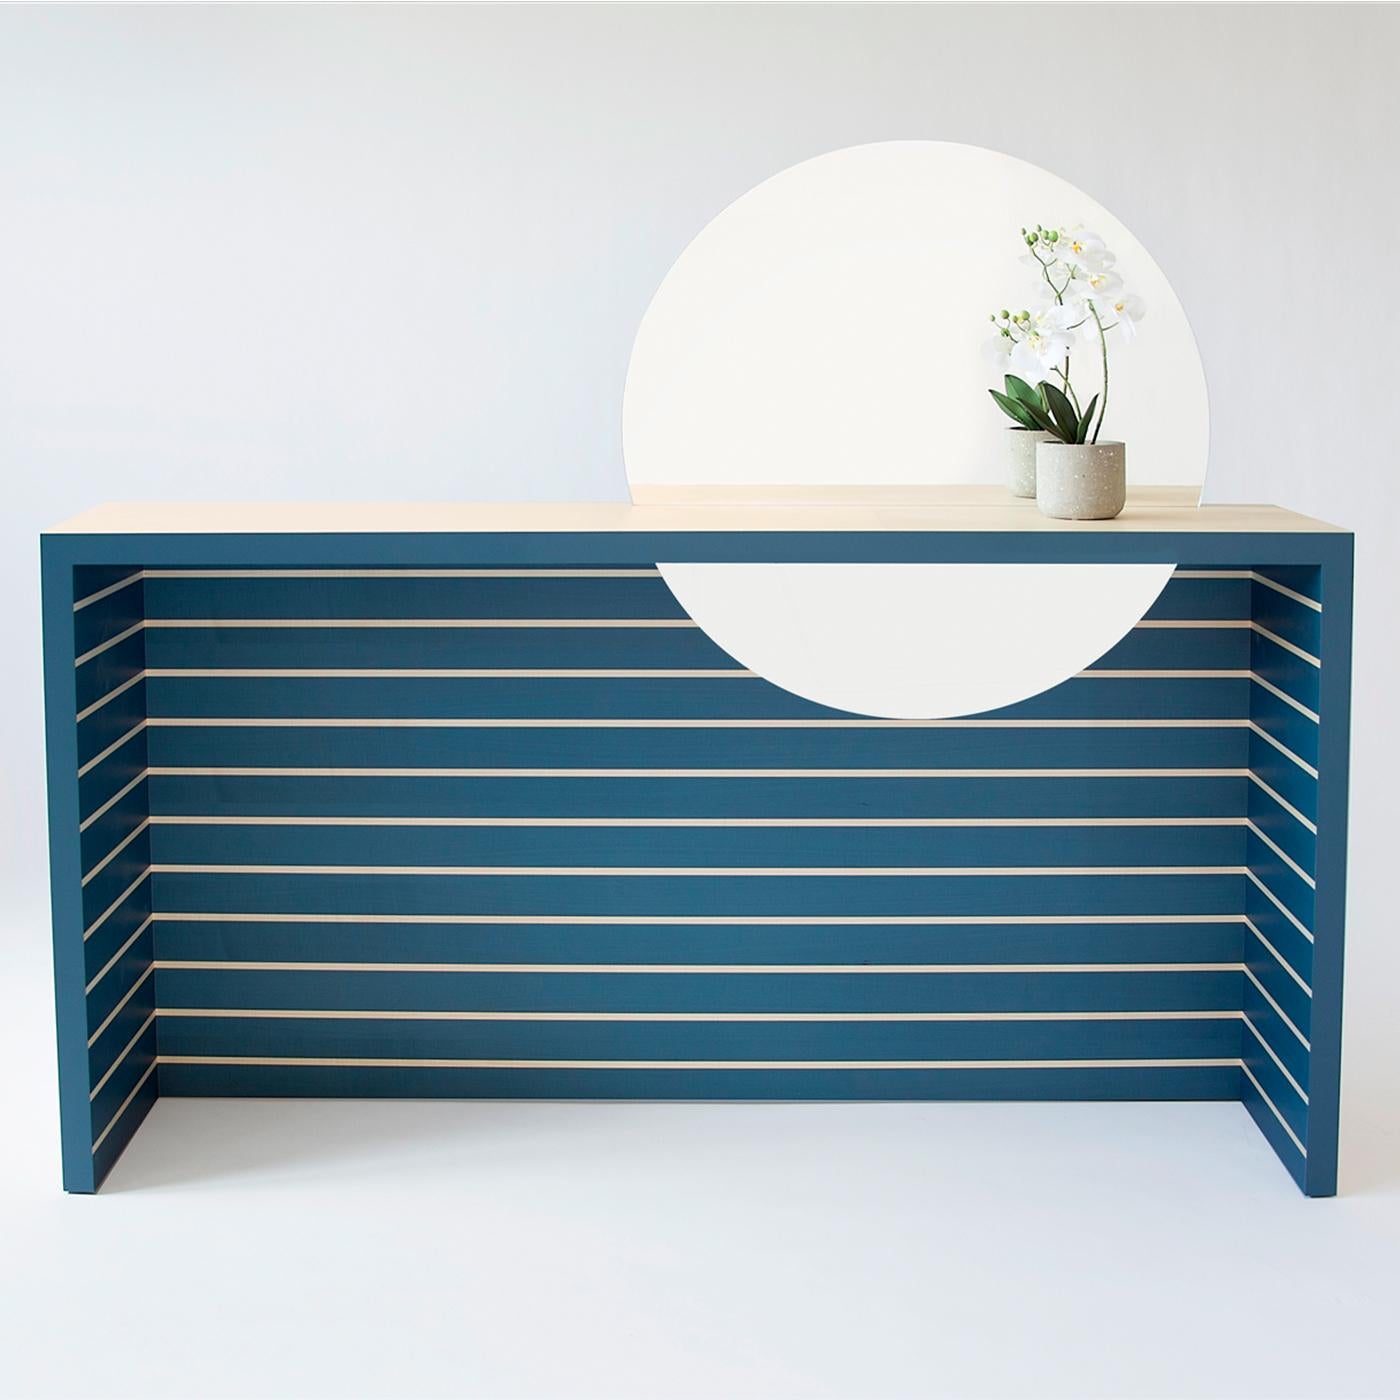 Designed by Sakura Adachi, this striking console is made of maple wood with two distinct finishes: natural on the outside and with blue and natural stripes on the outside. The minimal, rectangular silhouette features an off-center, round mirror that